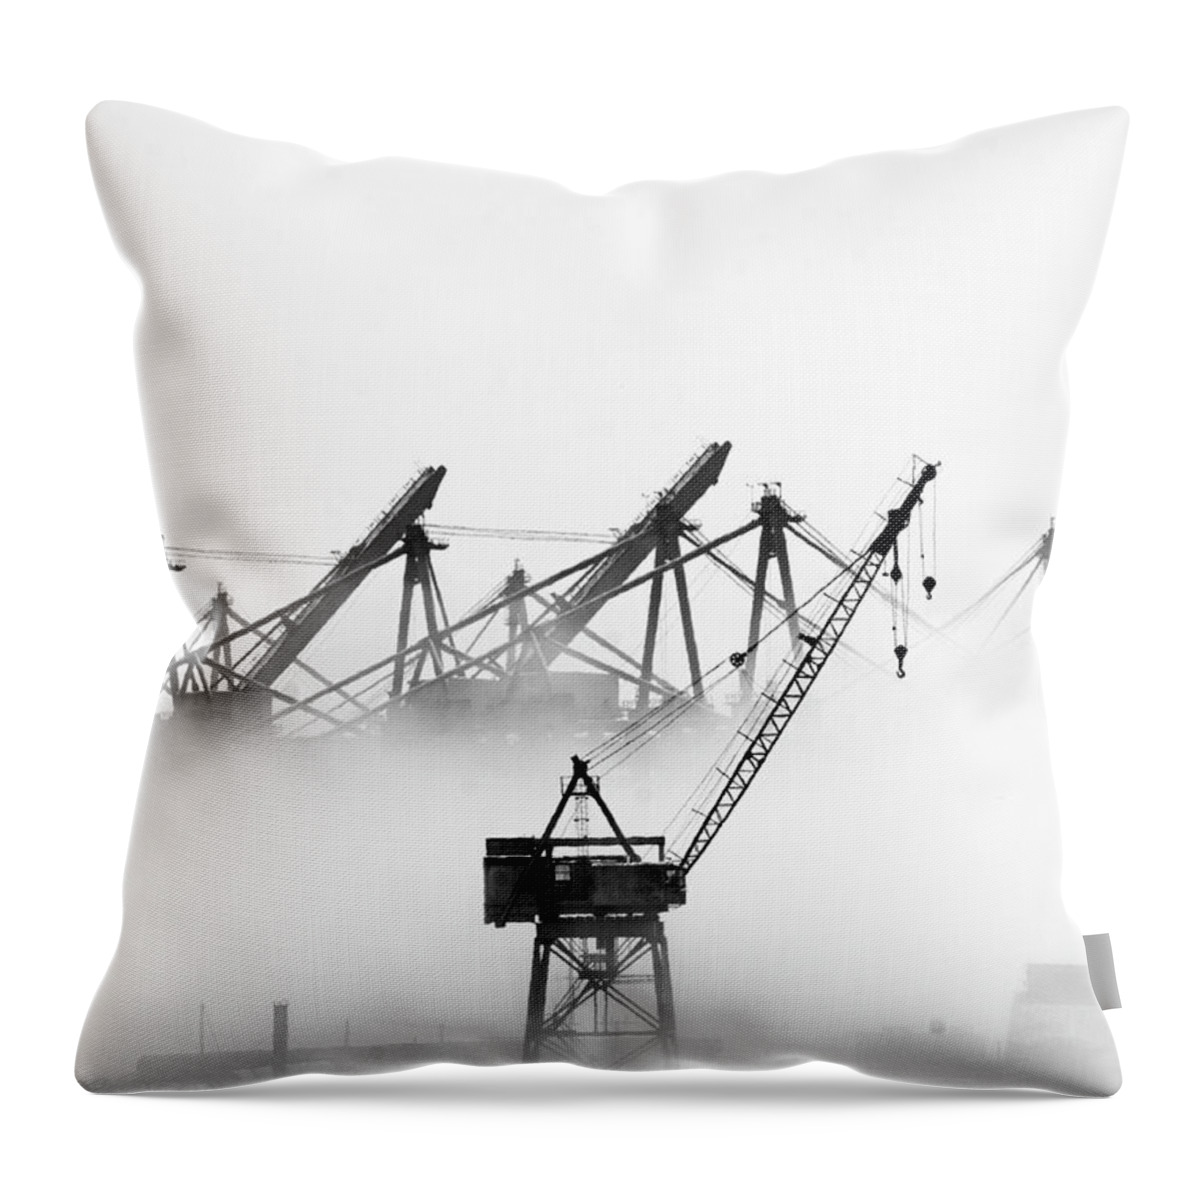 L.a. Harbor Throw Pillow featuring the photograph Harbor in Fog by Joe Schofield